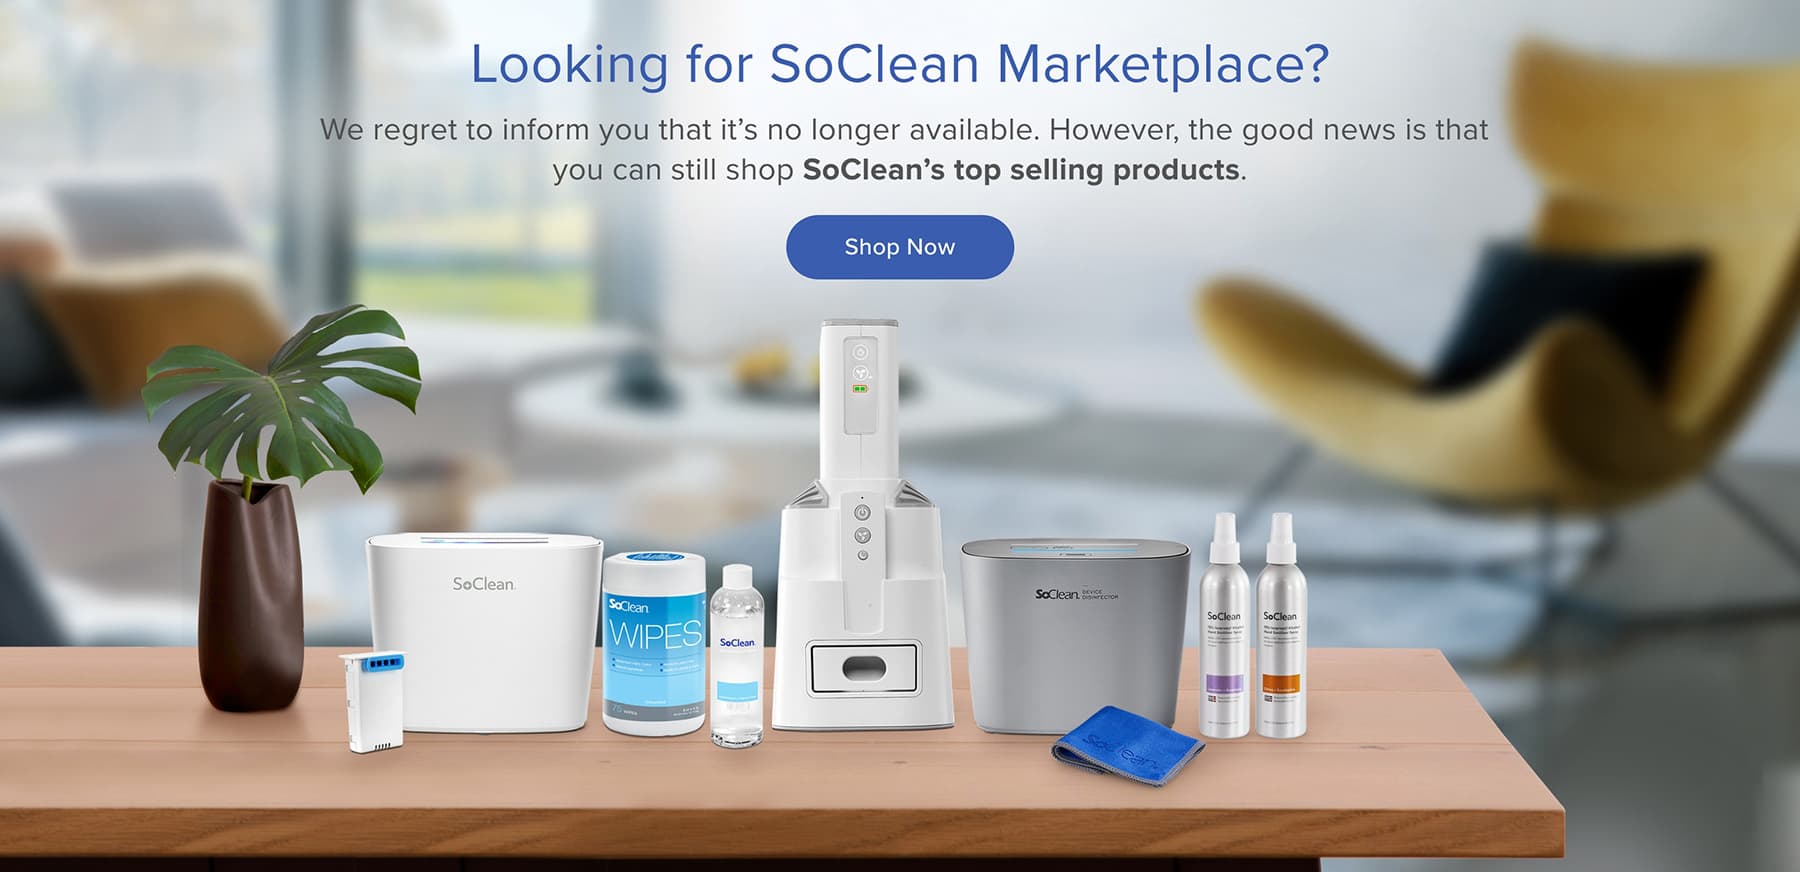 SoClean Marketplace is no longer available.